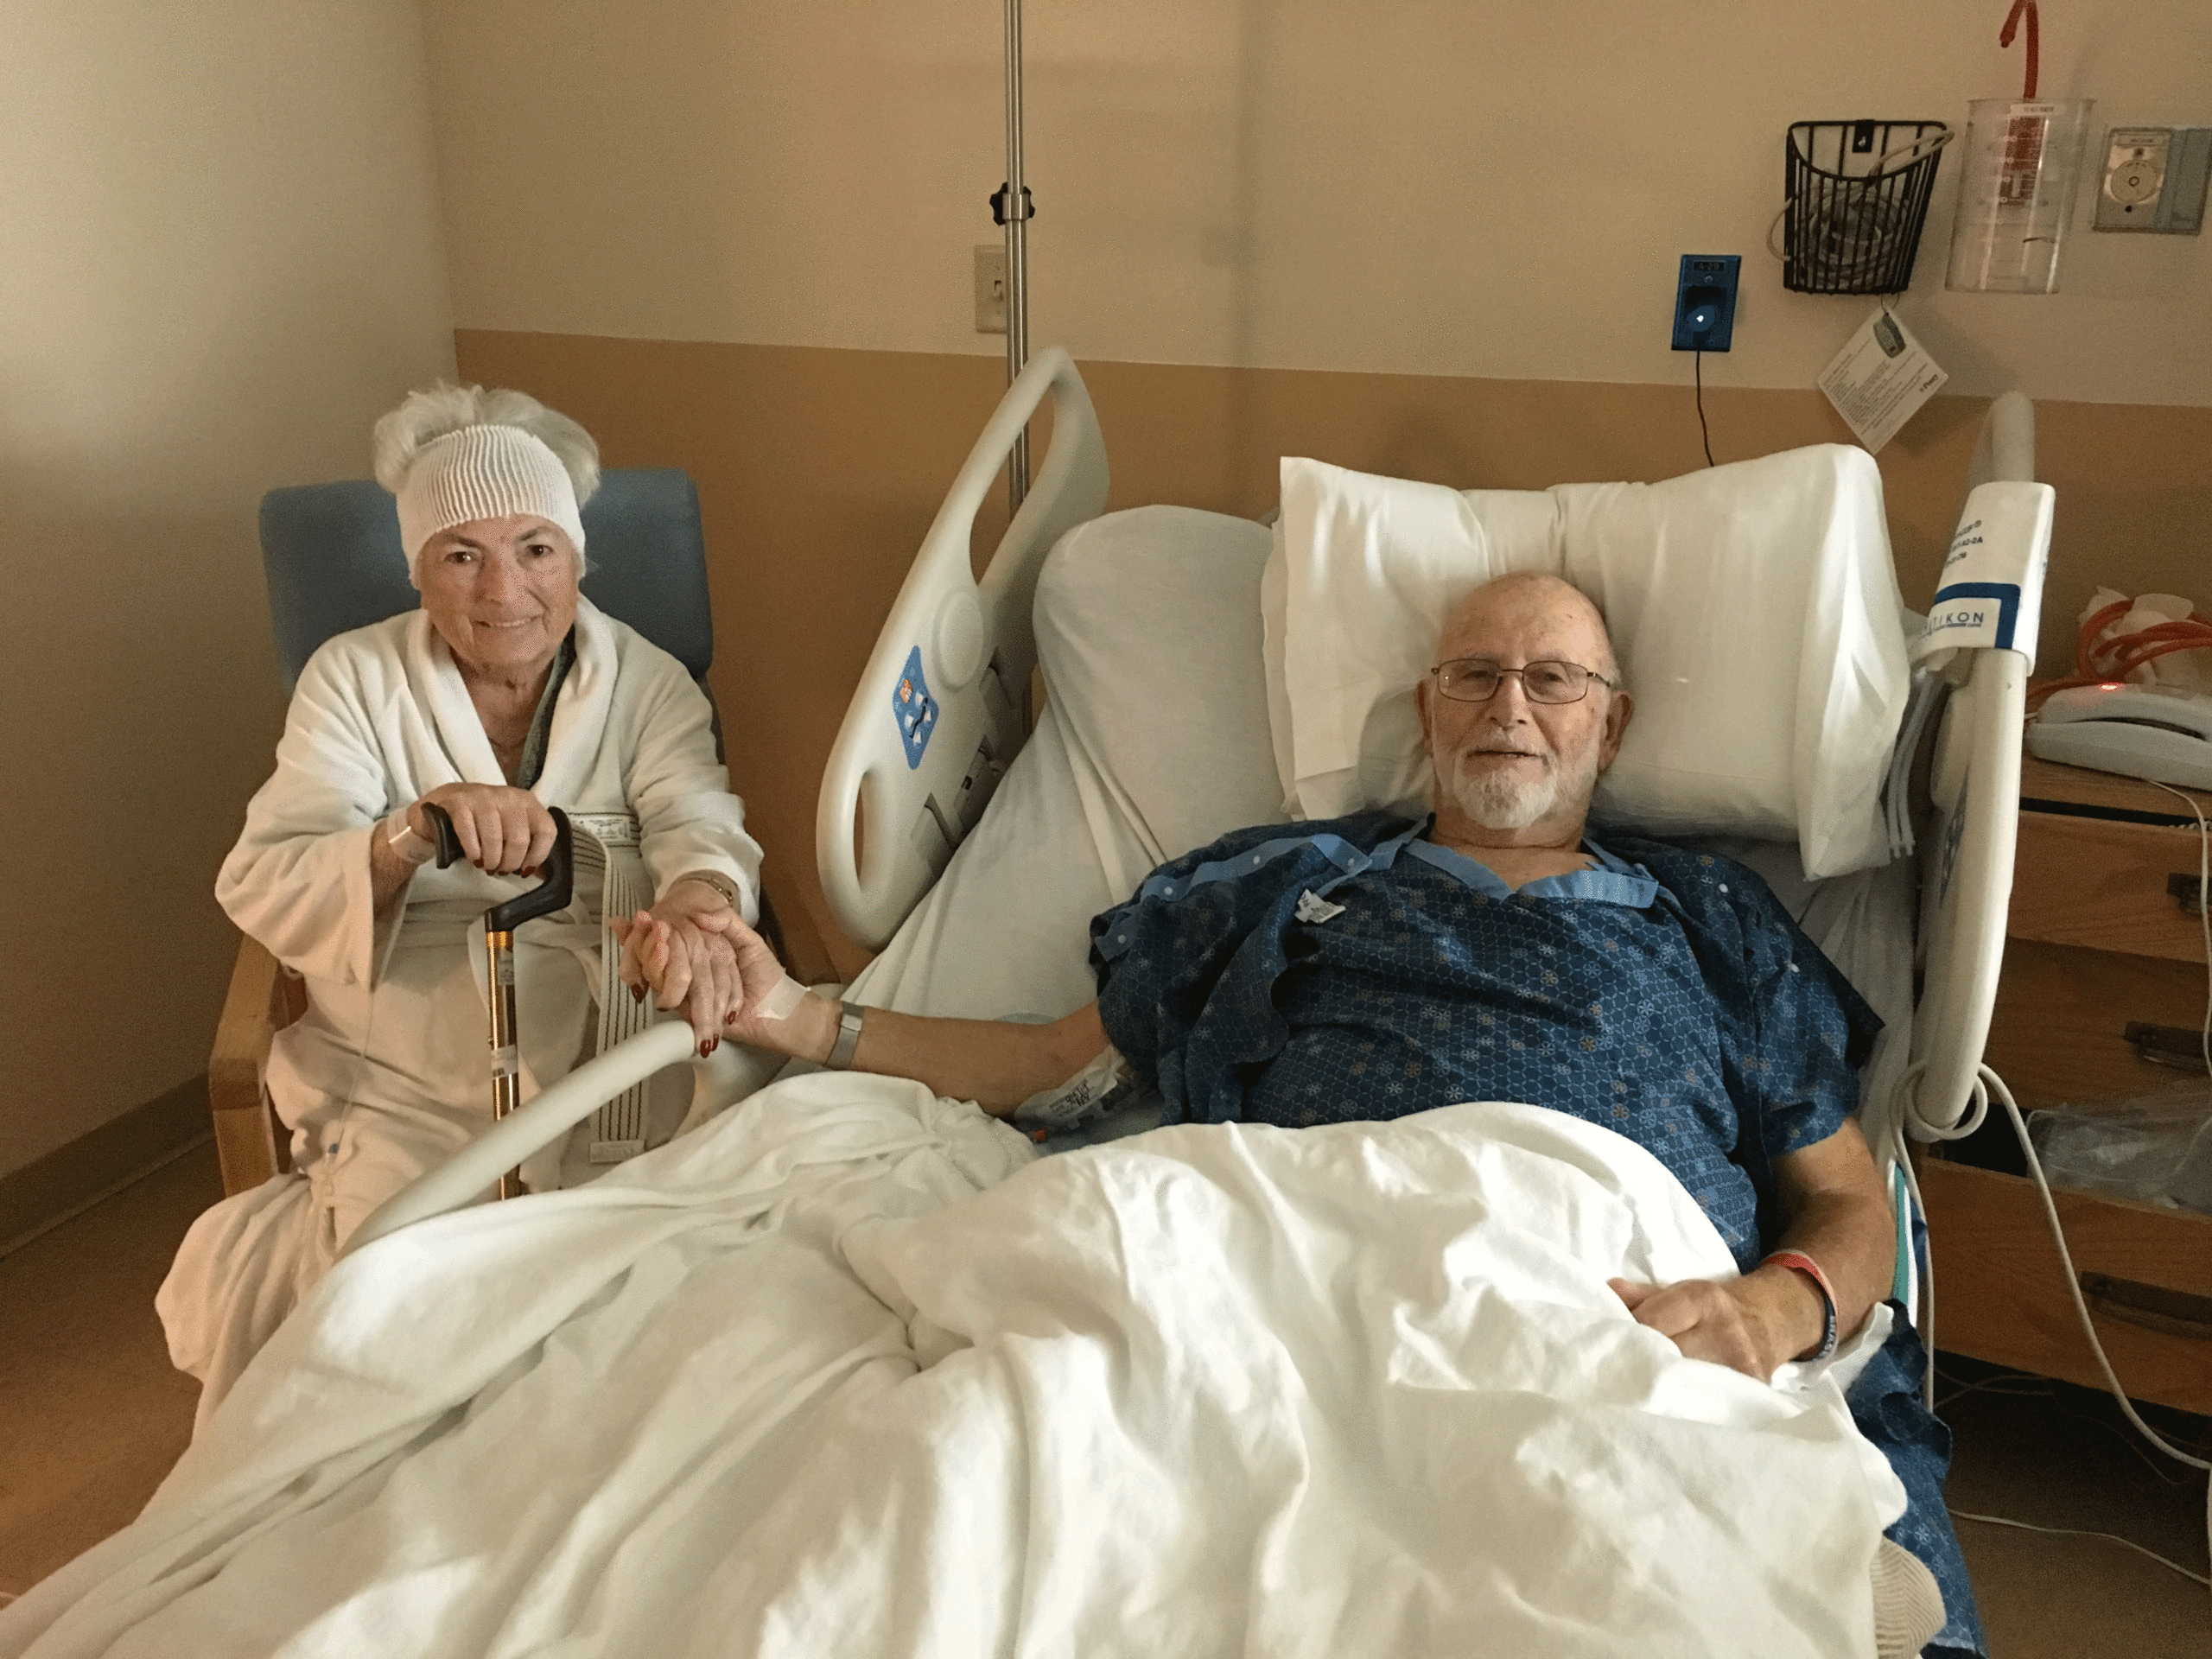 Man in hospital bed holding hands with woman sitting next to him